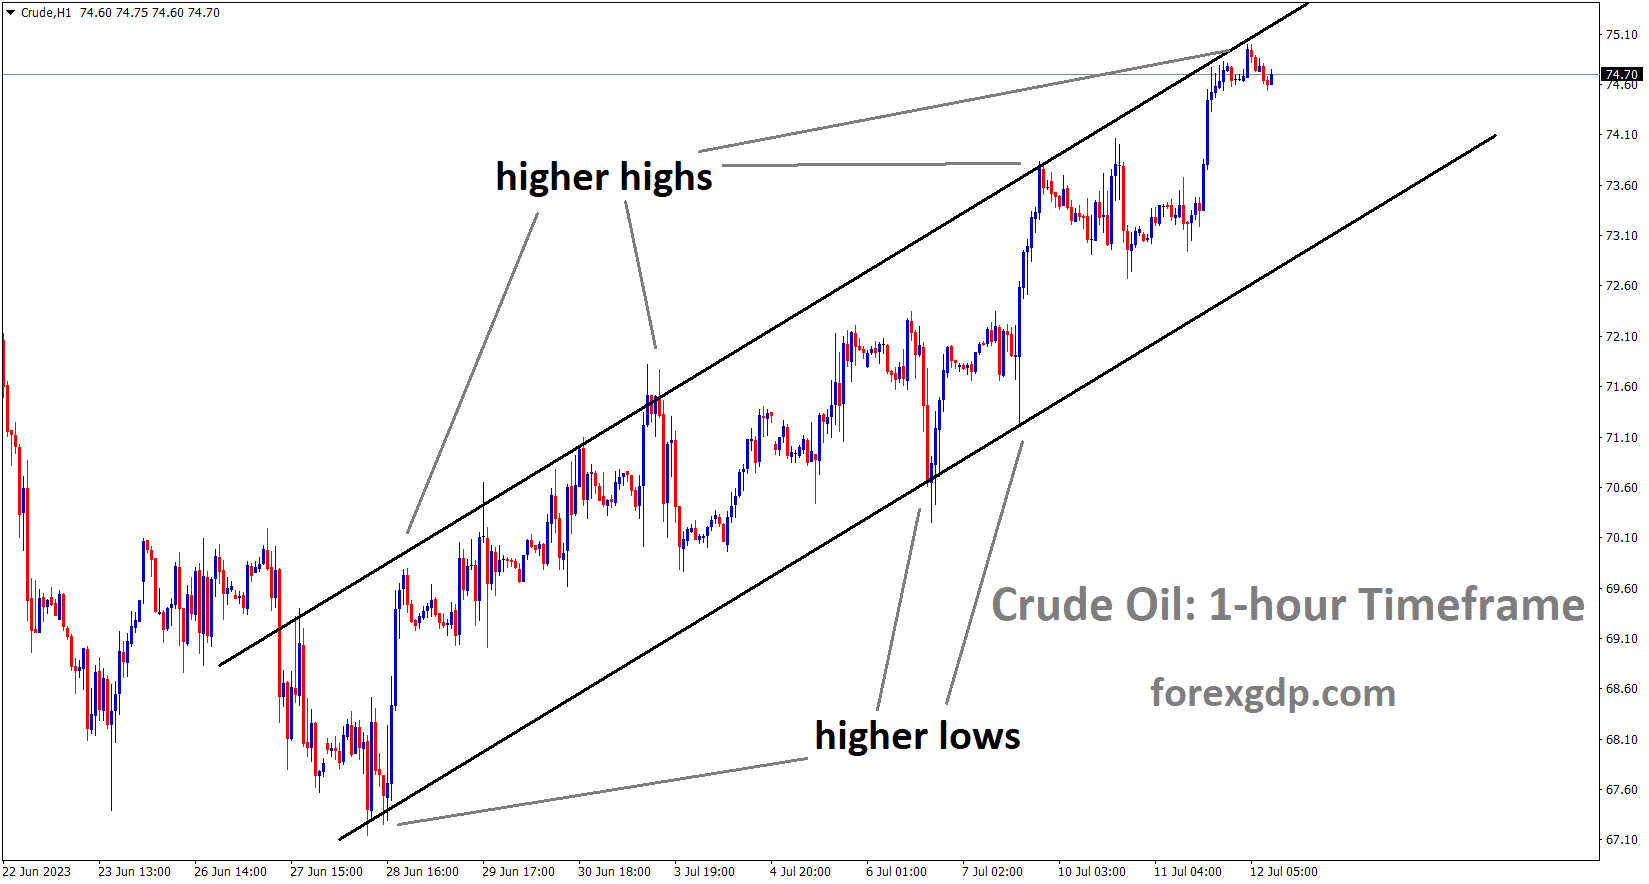 Crude H1 TF analysis Market is moving in an Ascending channel and the market has reached the higher high area of the channel